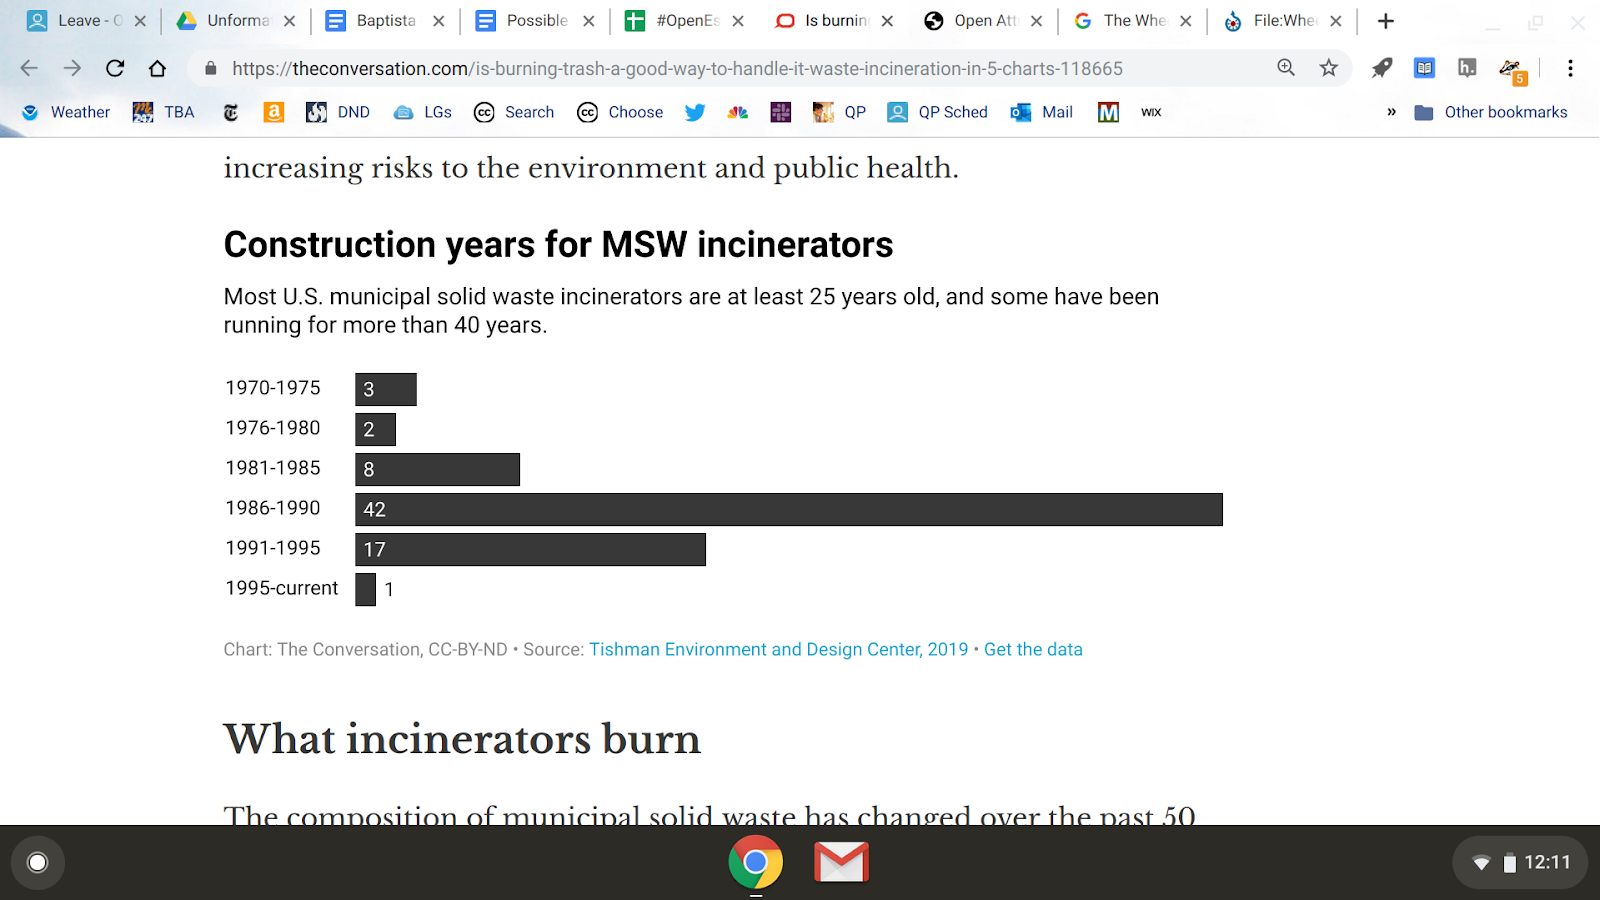 Image of number from The Conversation.com that show the Construction years for MSW incinerators